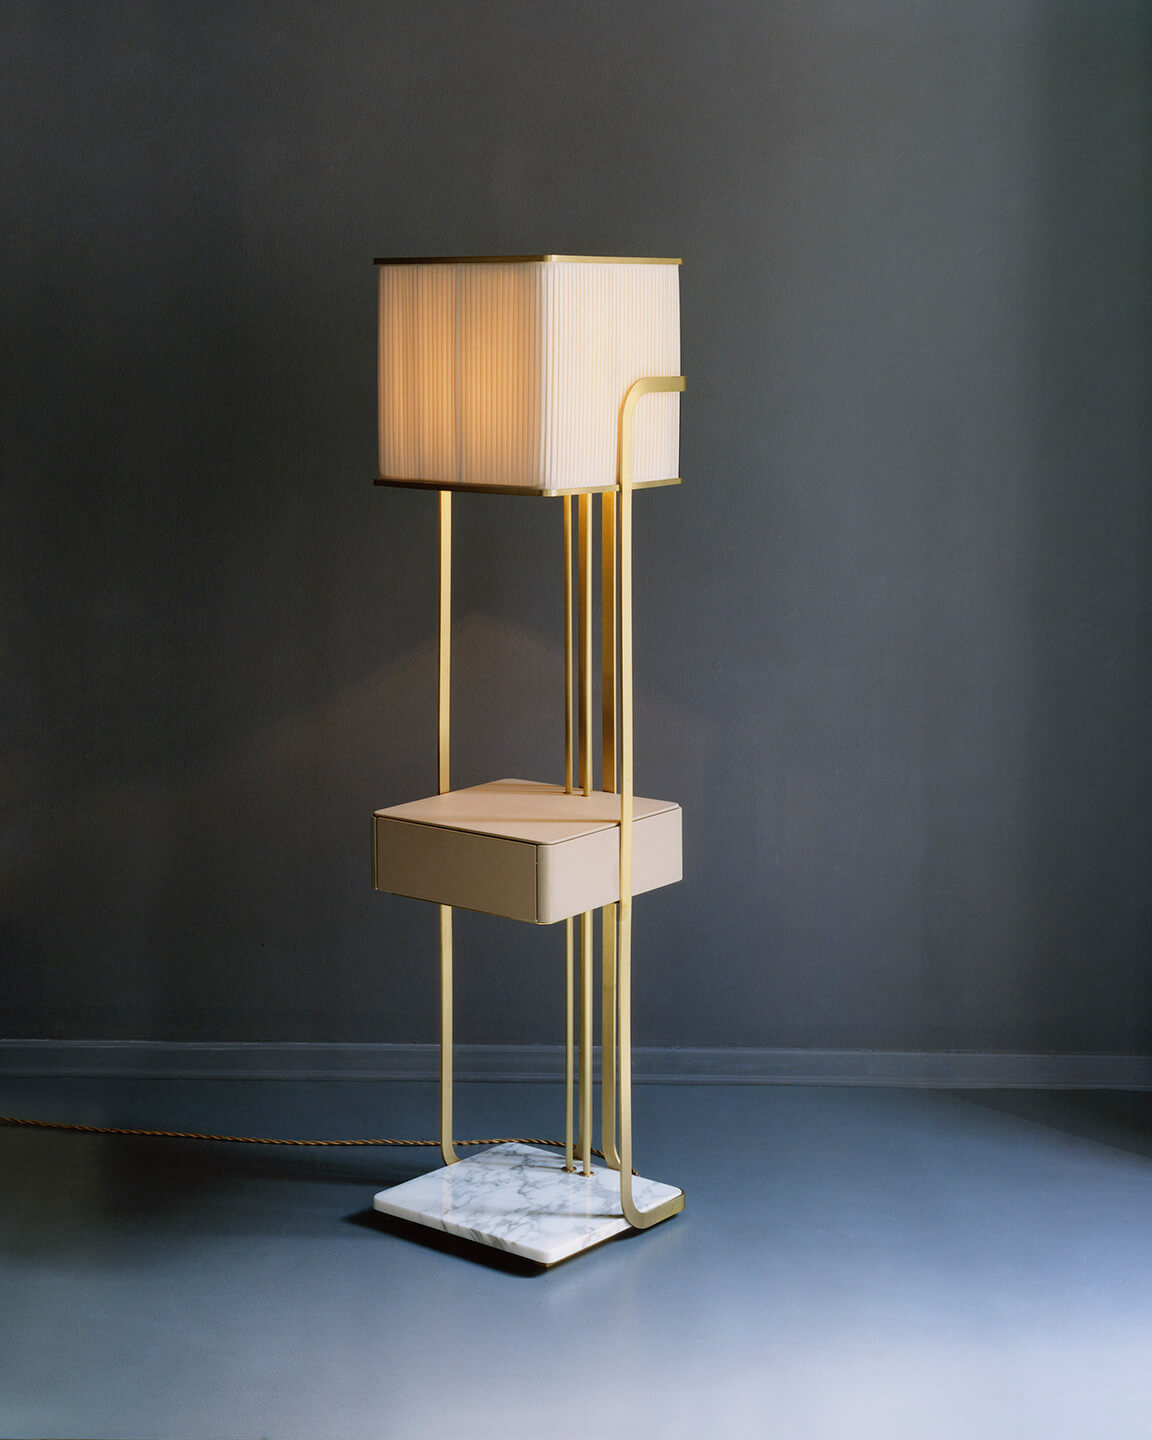 Megan with Drawer - standing lamp I1a LPA 2017